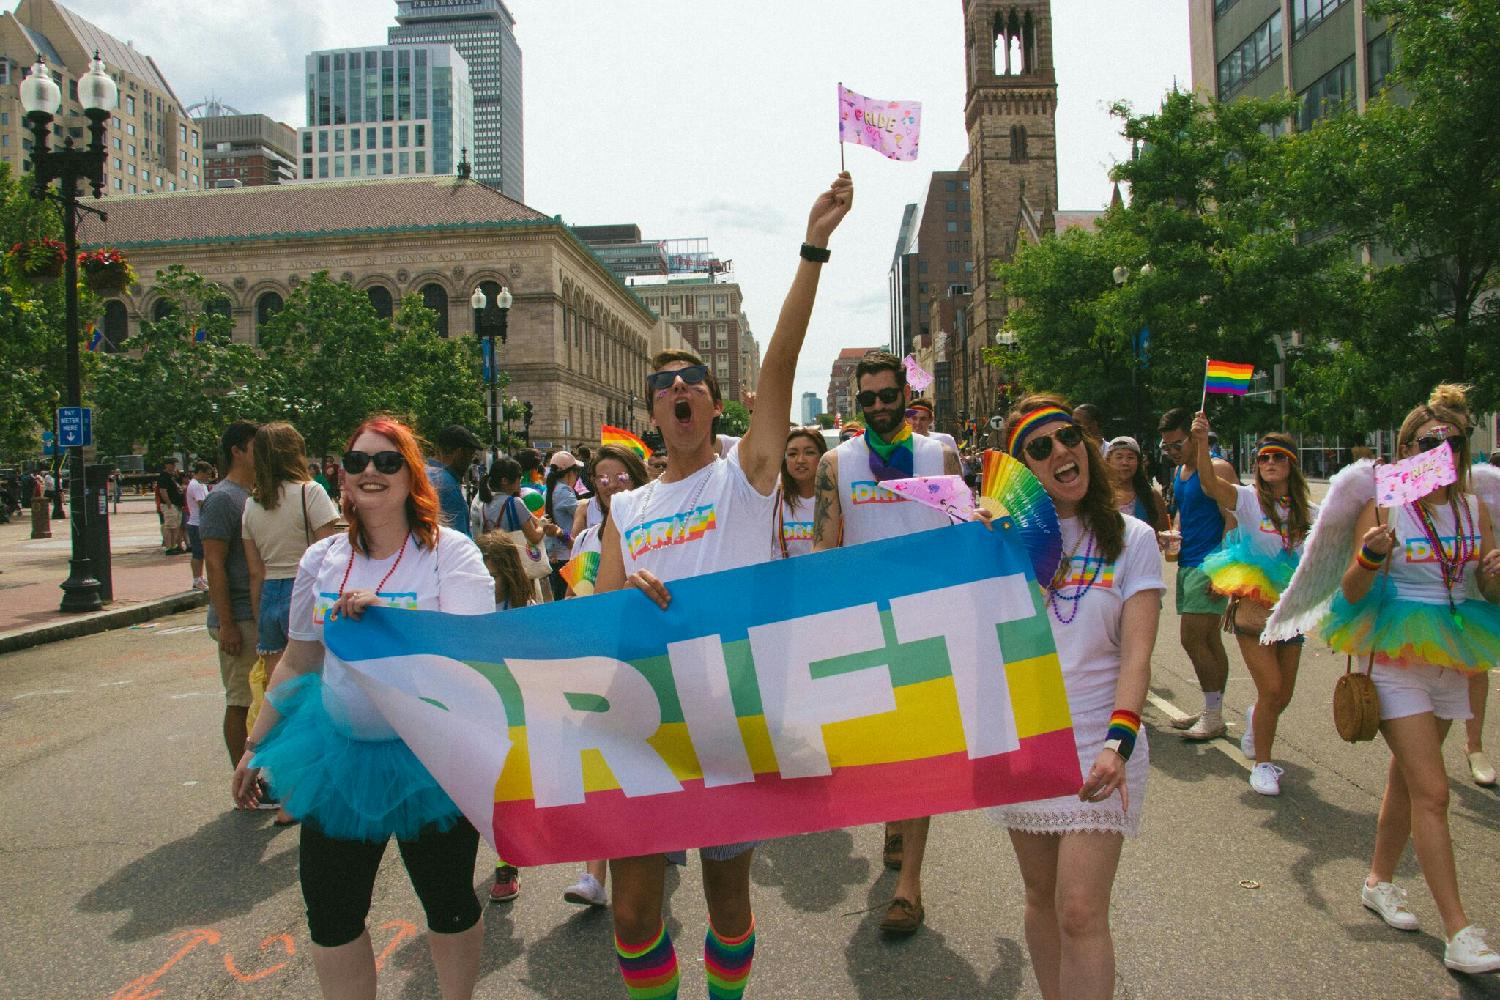 Drift sends a large group of employees to the Pride celebrations in cities where we have offices every year.